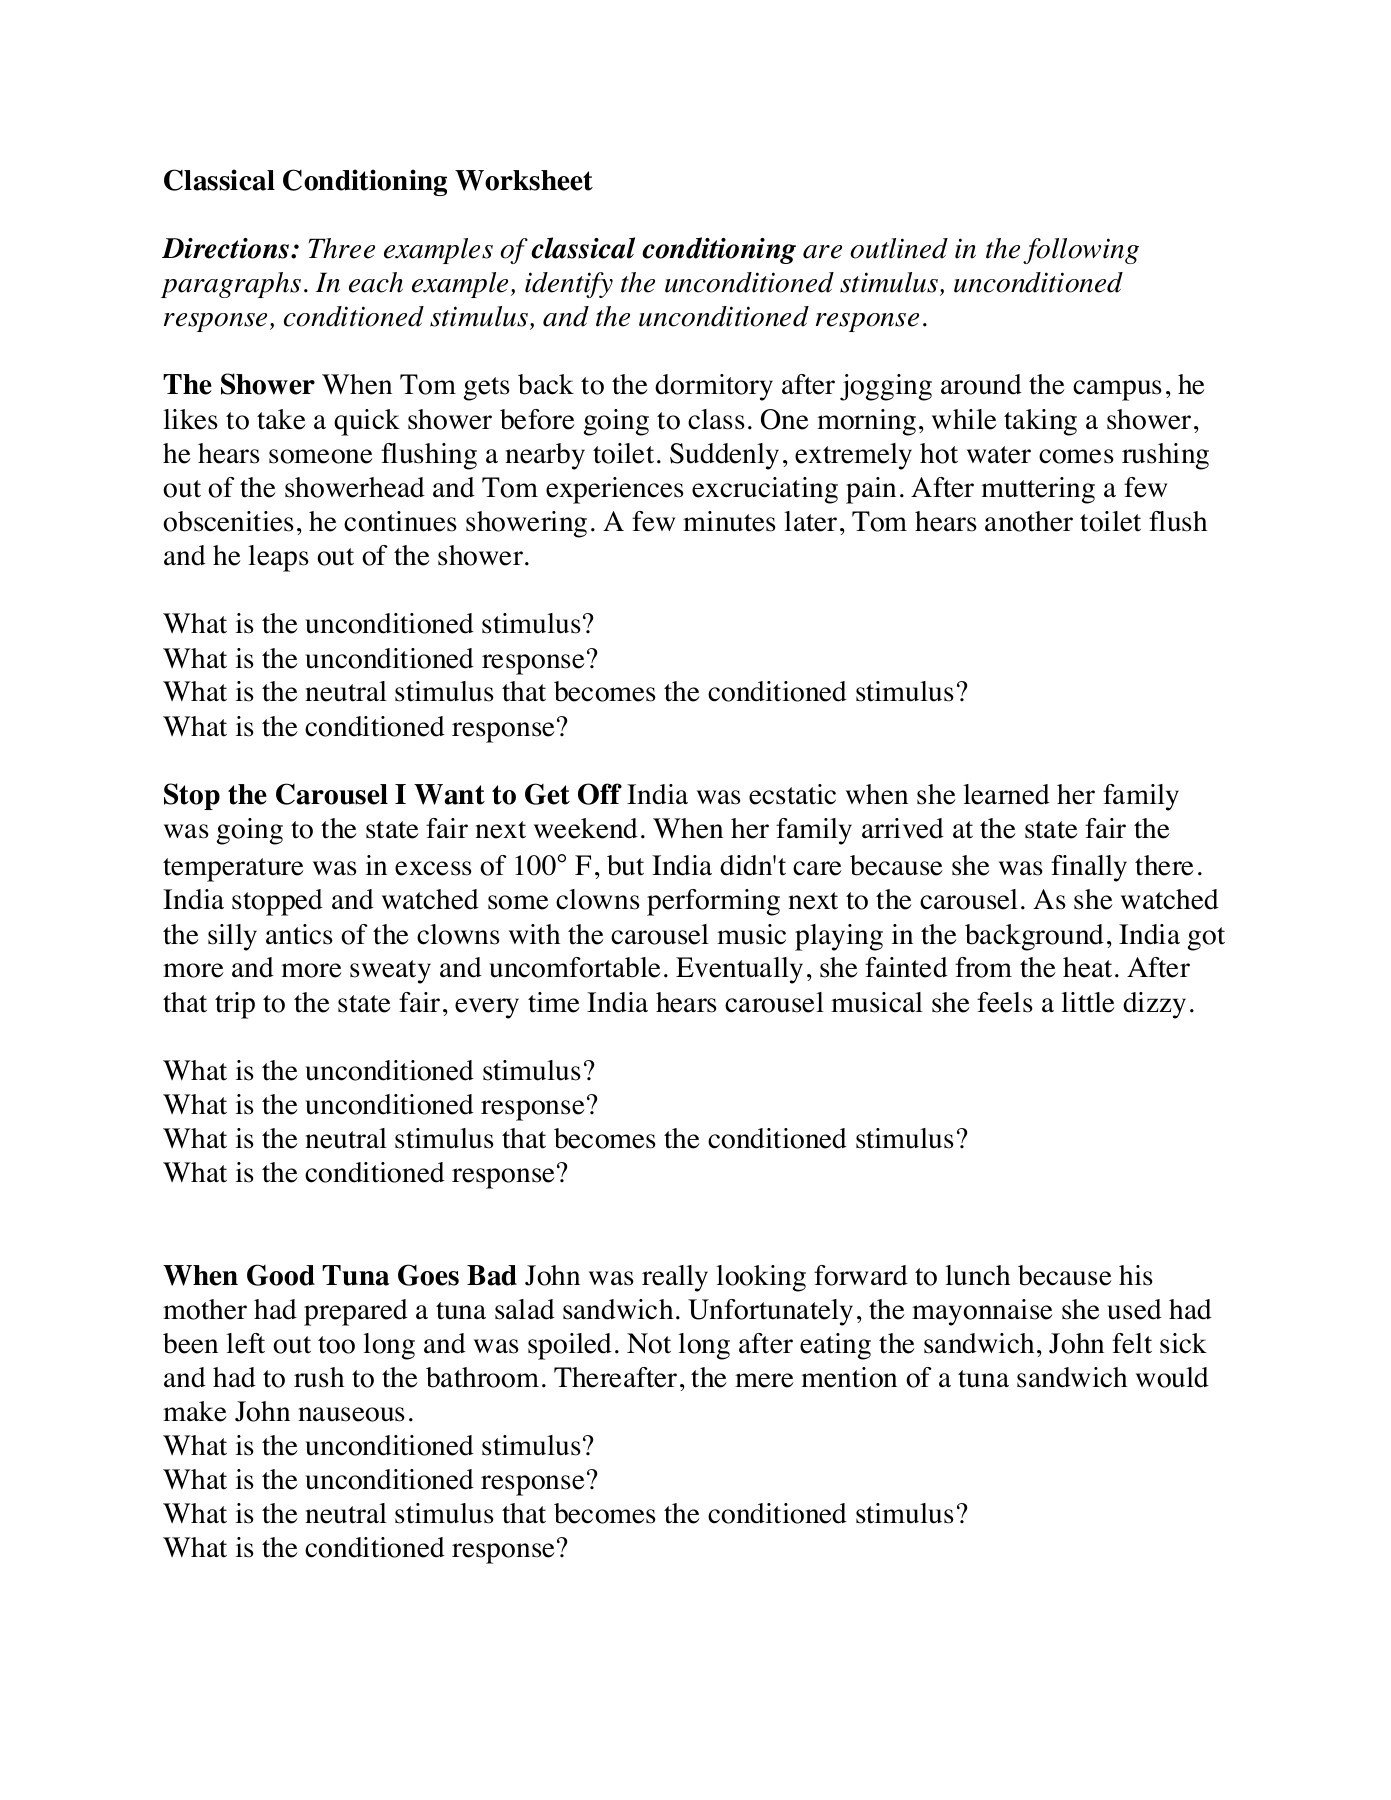 Classical Conditioning Worksheet 2  Lps Pages 1  4  Text Version For Classical Conditioning Worksheet